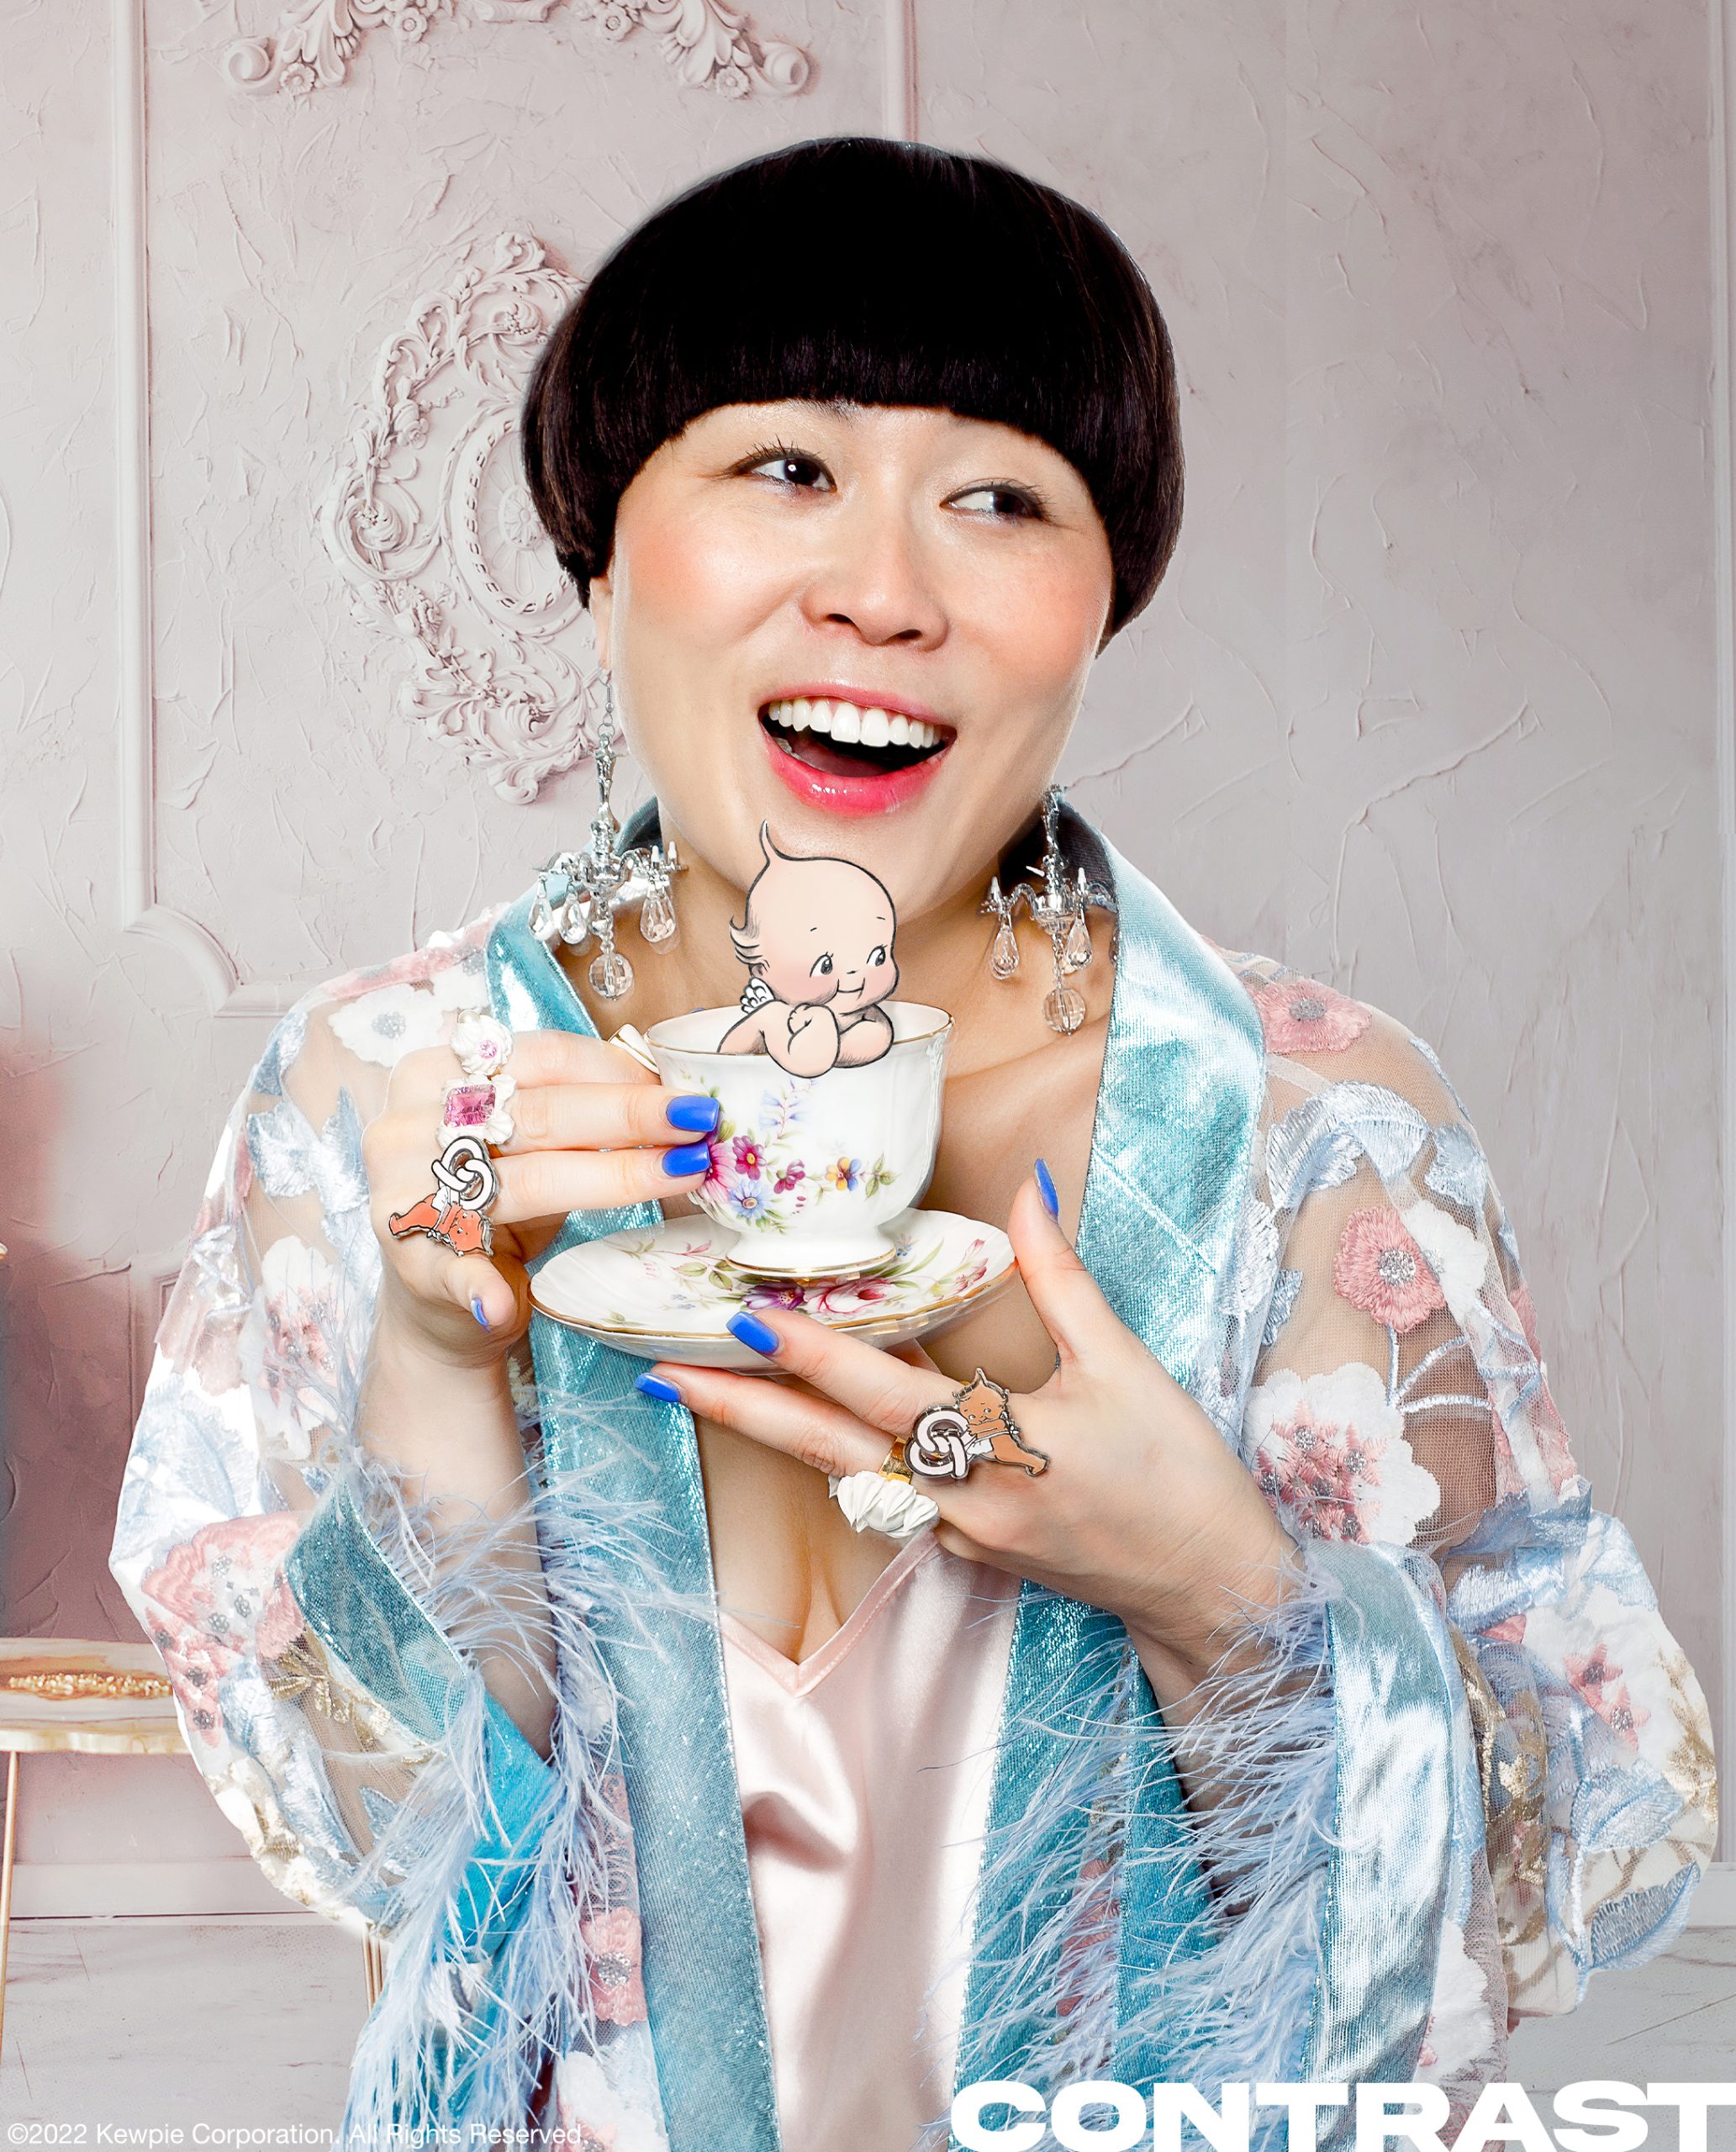 Comedian and HBO Max star Atsuko Okastuko poses in a floral blue silk robe and a pink silk slip holding a floral tea cup while laughing and smiling and wearing chandelier ear rings. The image features an illustrated light tone Kewpie doll character. This editorial was produced by ONCH, formerly known as Onch Movement.